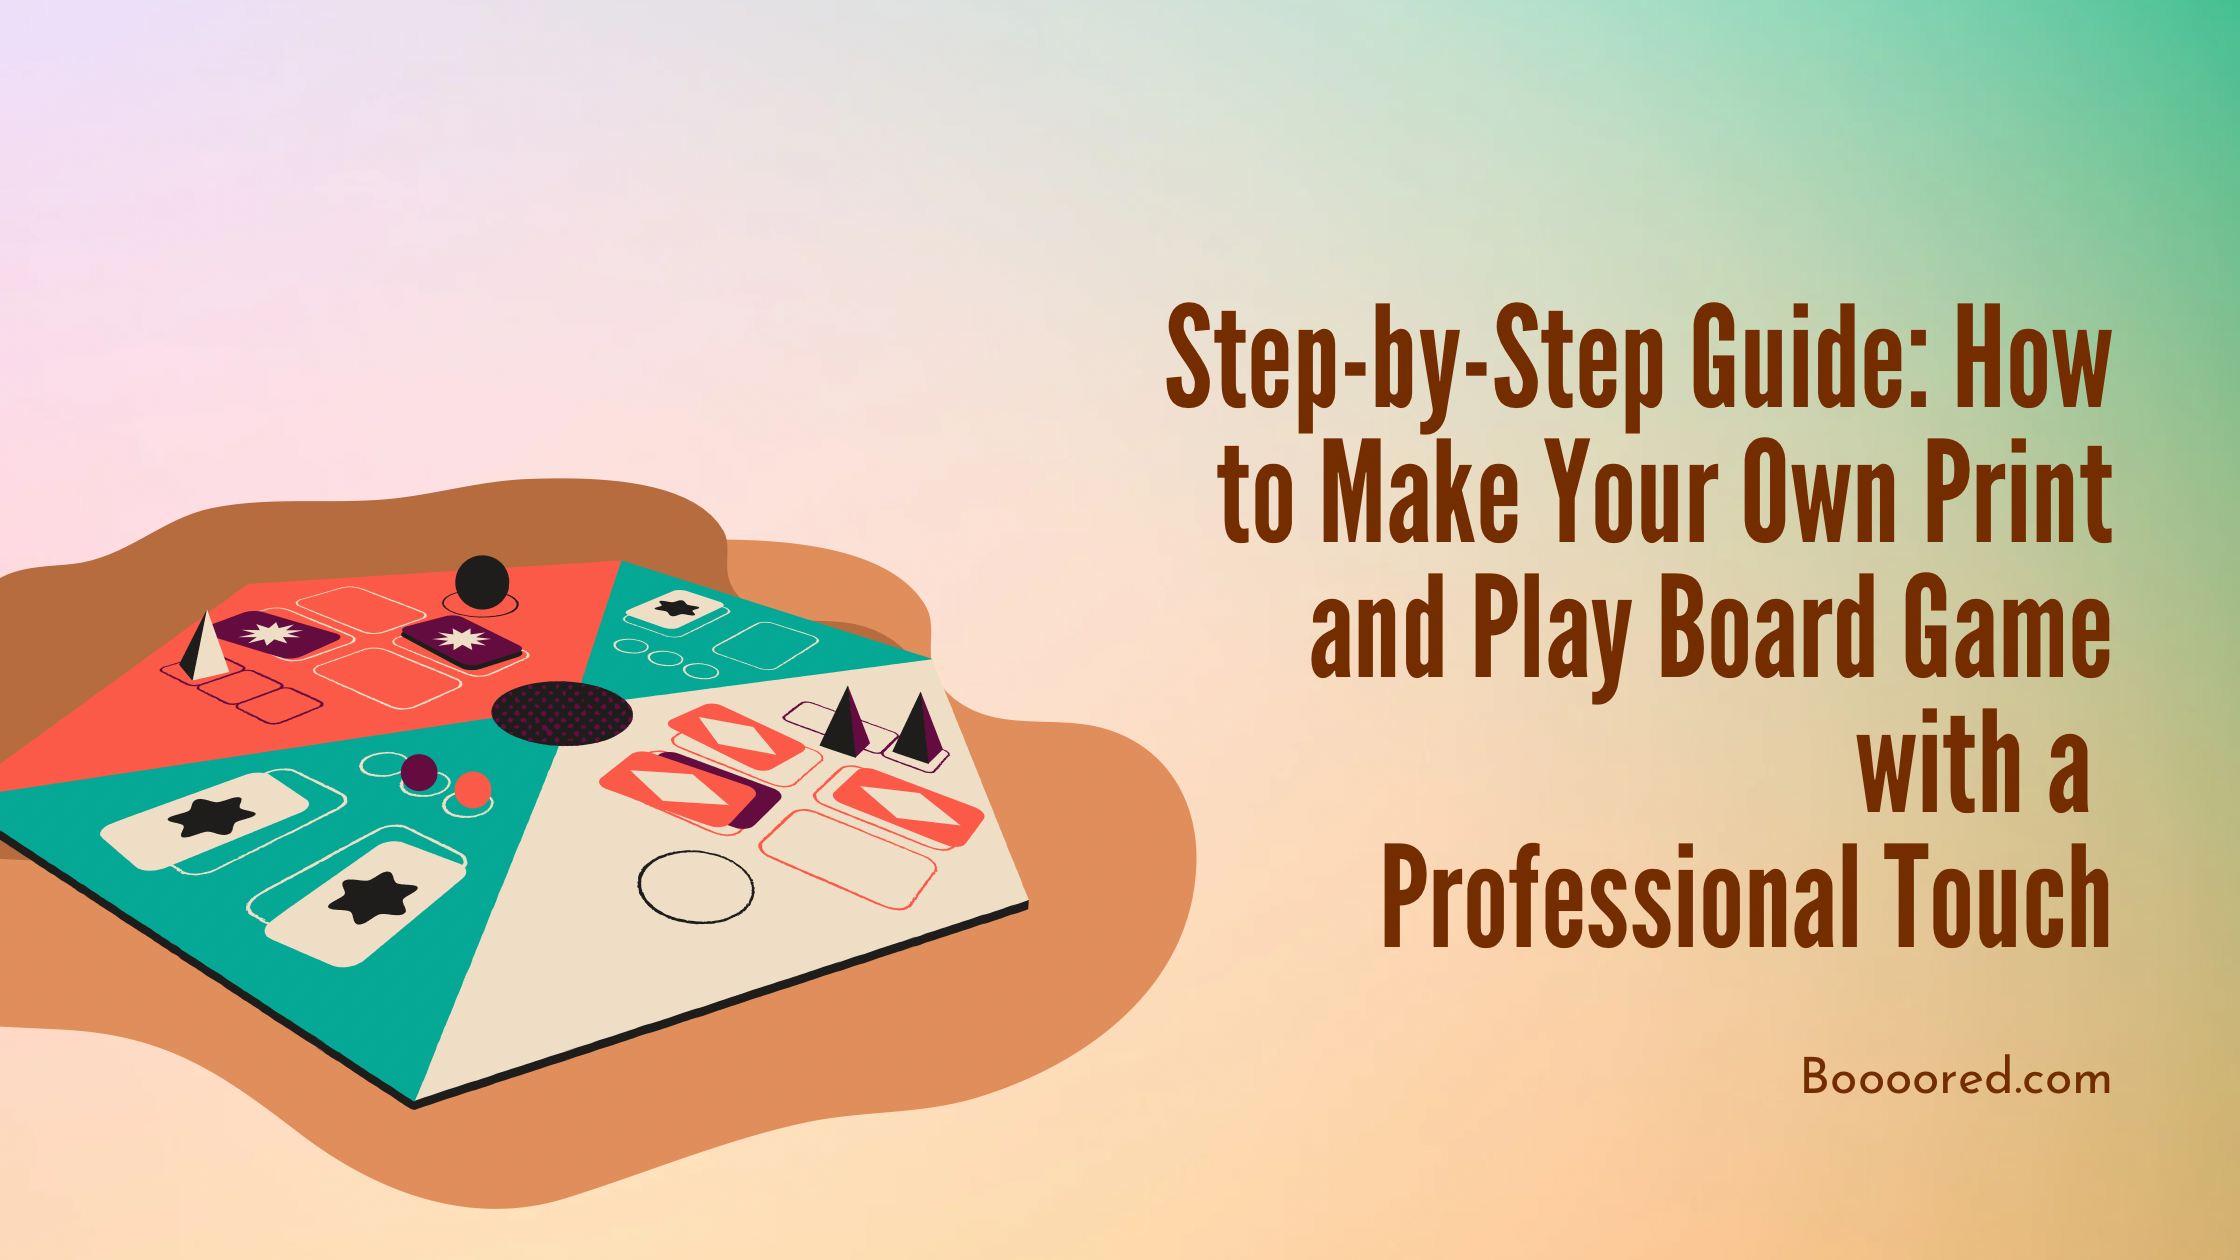 Step-by-Step Guide: How to Make Your Own Print and Play Board Game with a Professional Touch